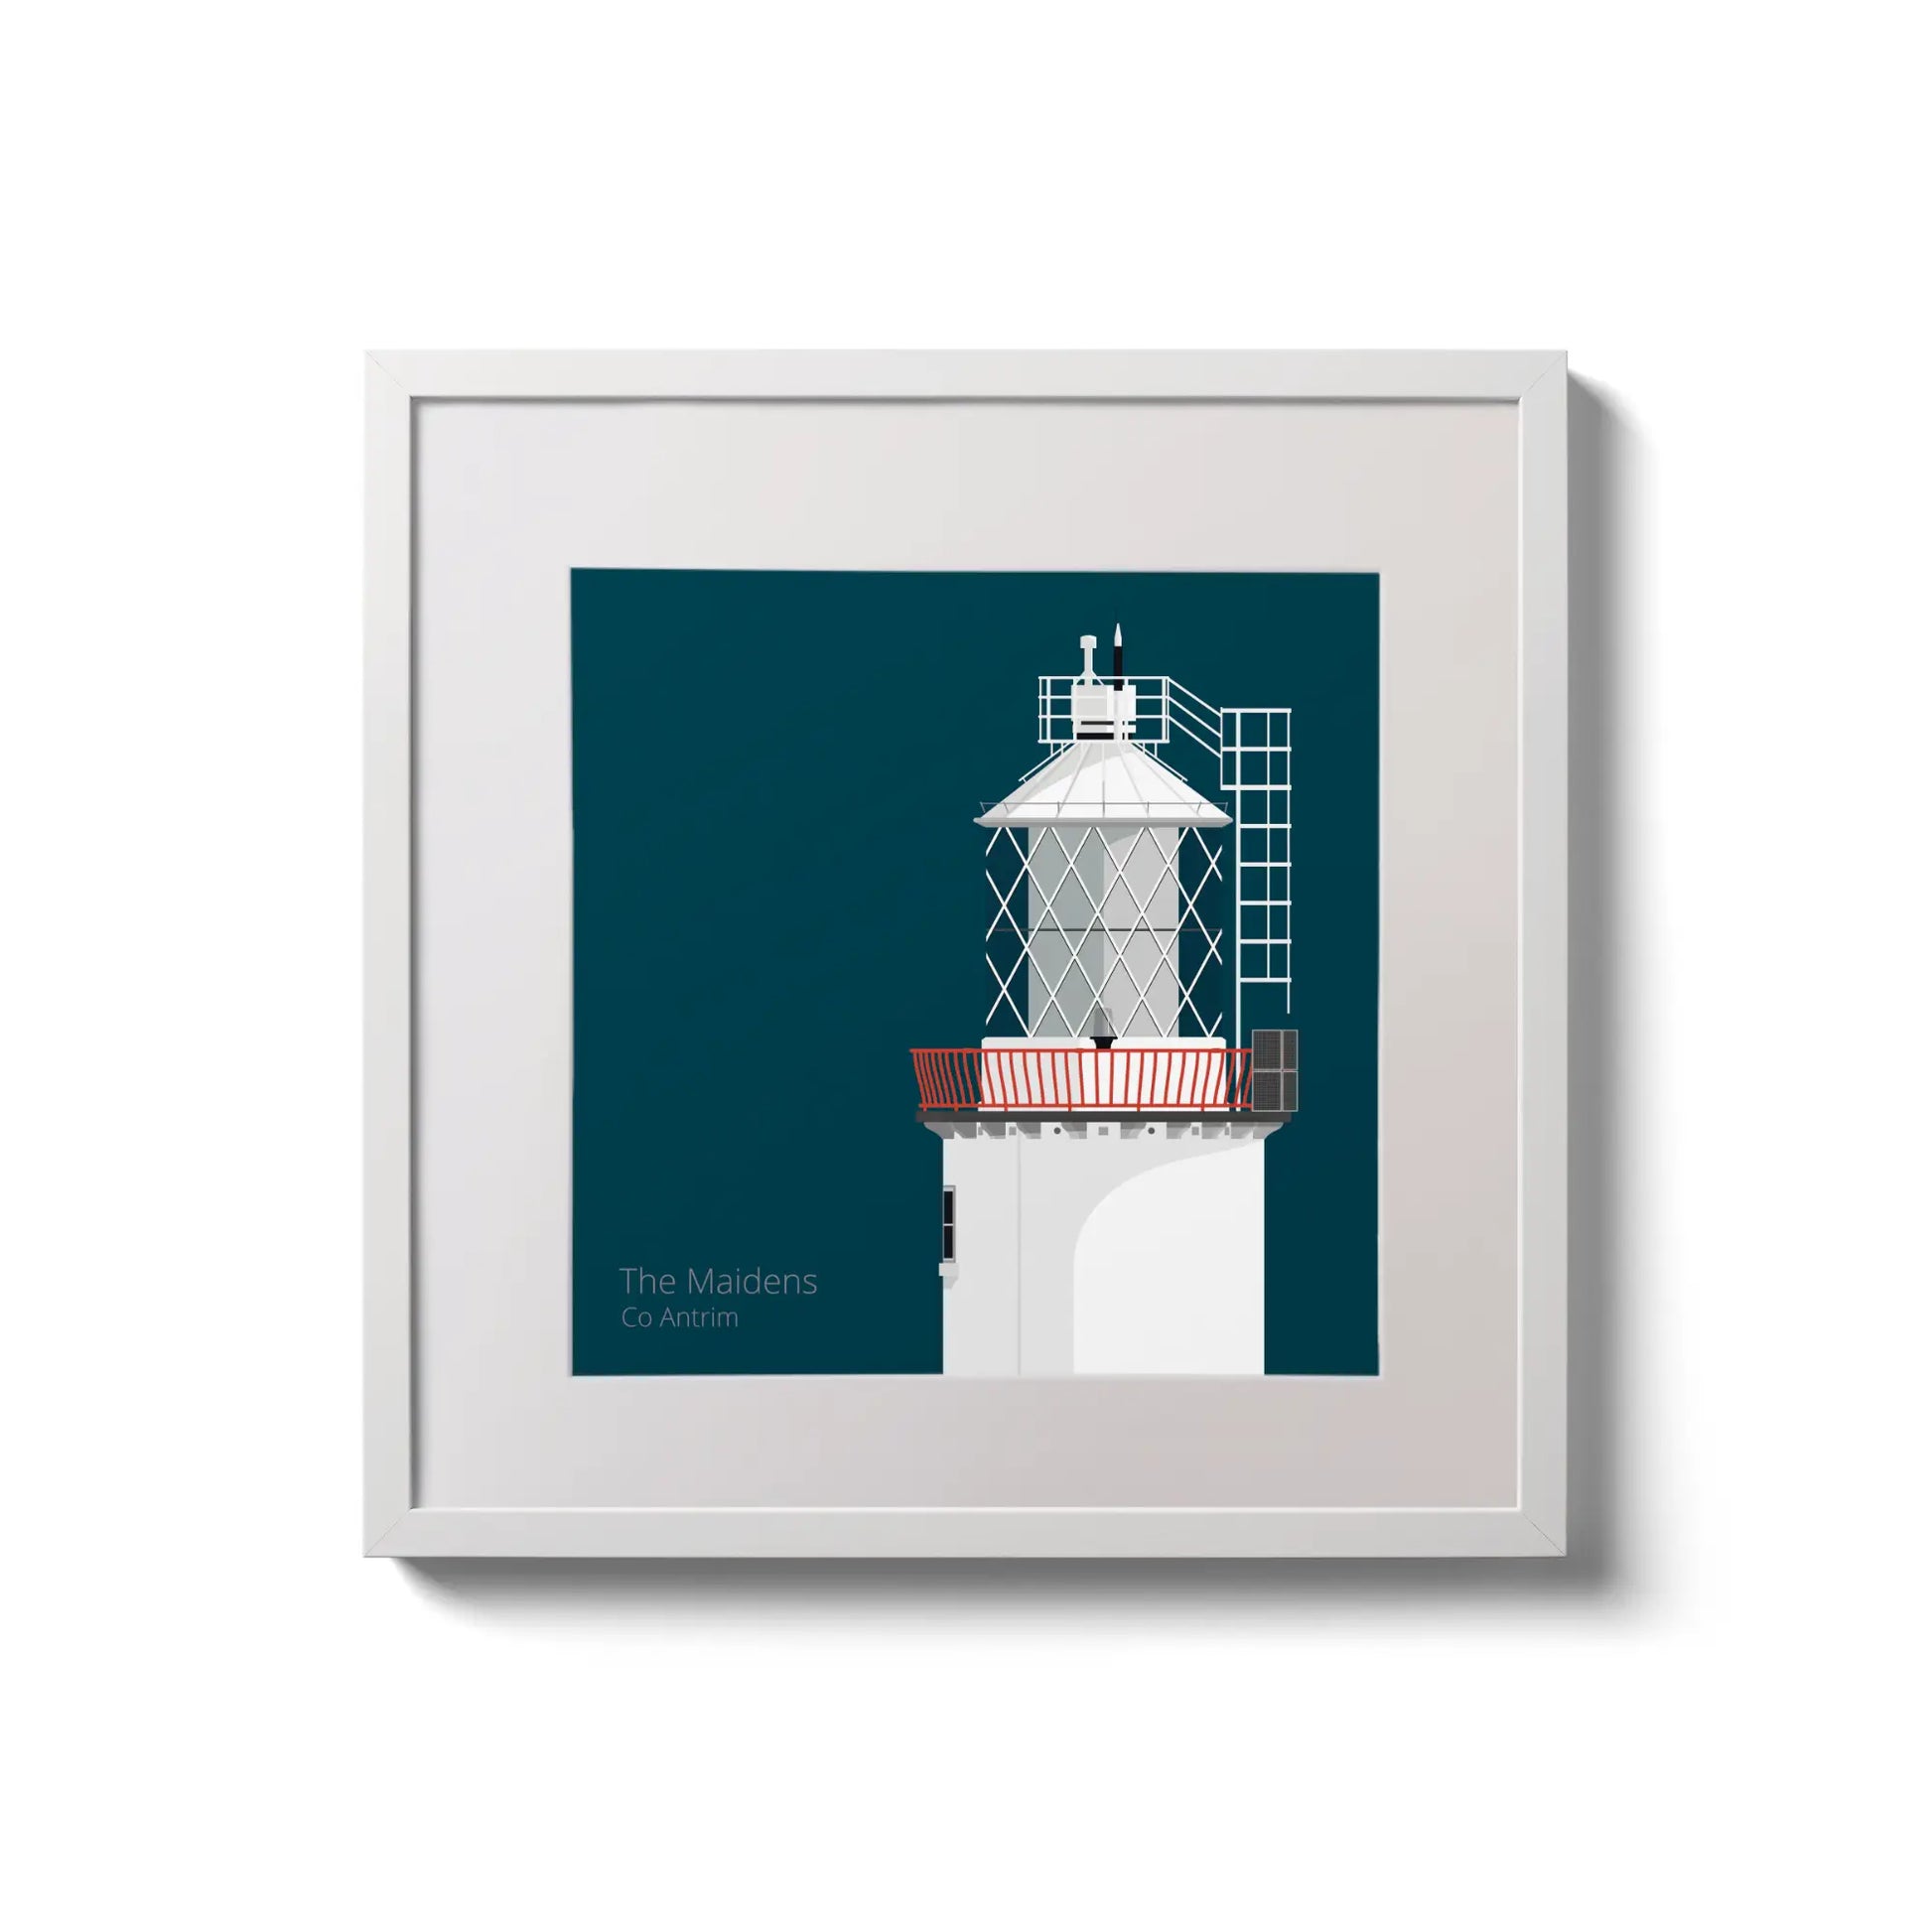 Illustration of The Maidens lighthouse on a midnight blue background,  in a white square frame measuring 20x20cm.